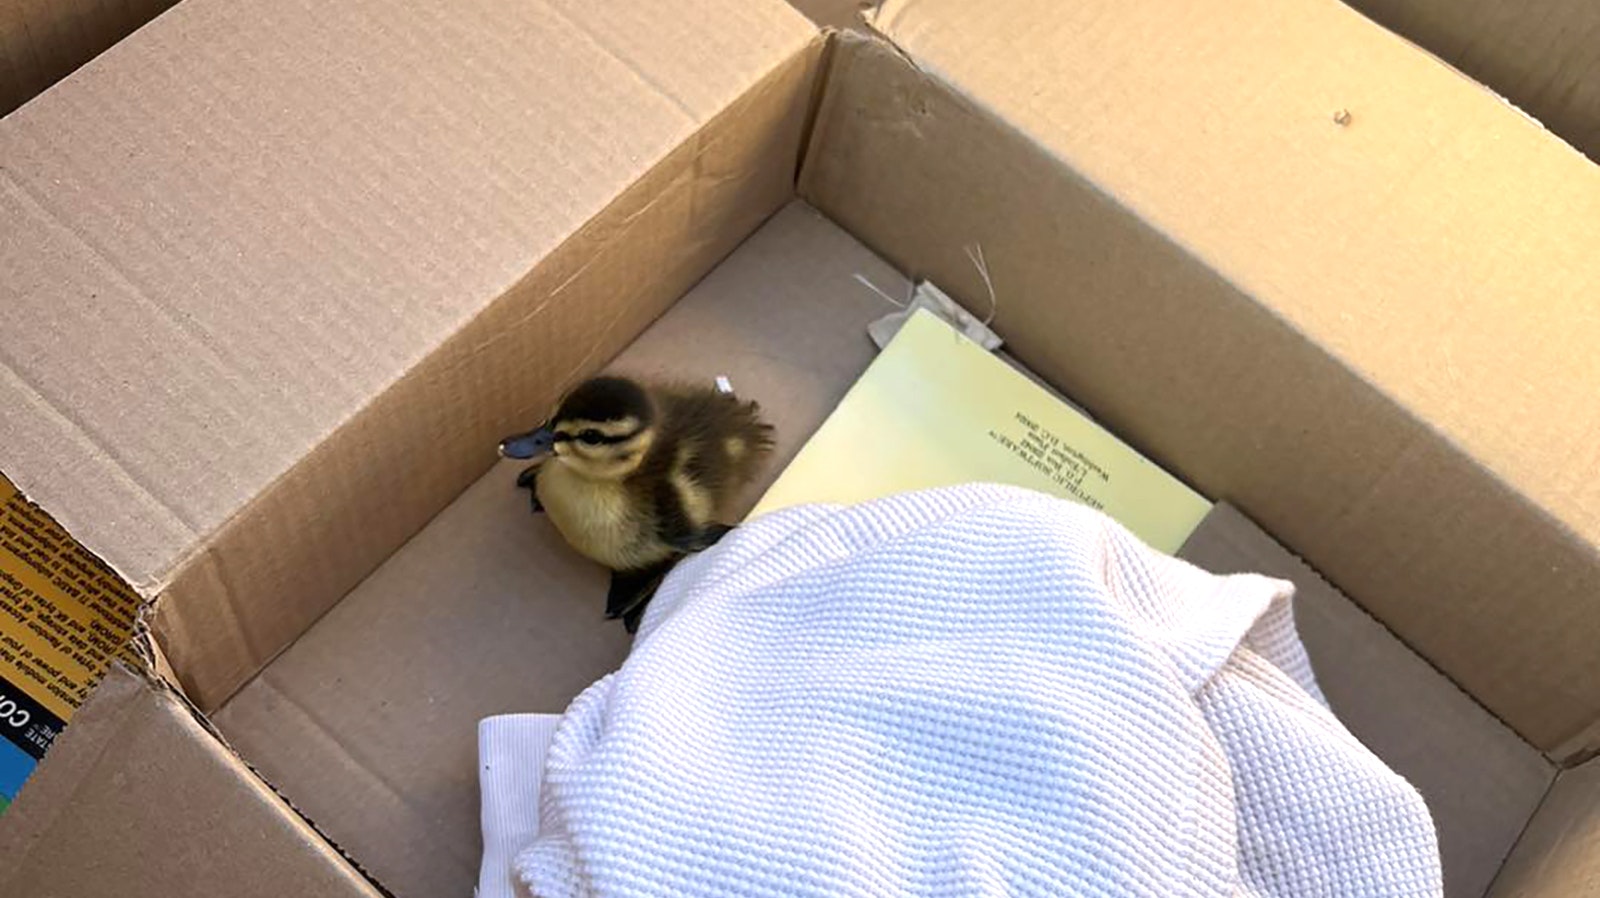 One of three ducklings pulled from a Laramie storm drain Tuesday.